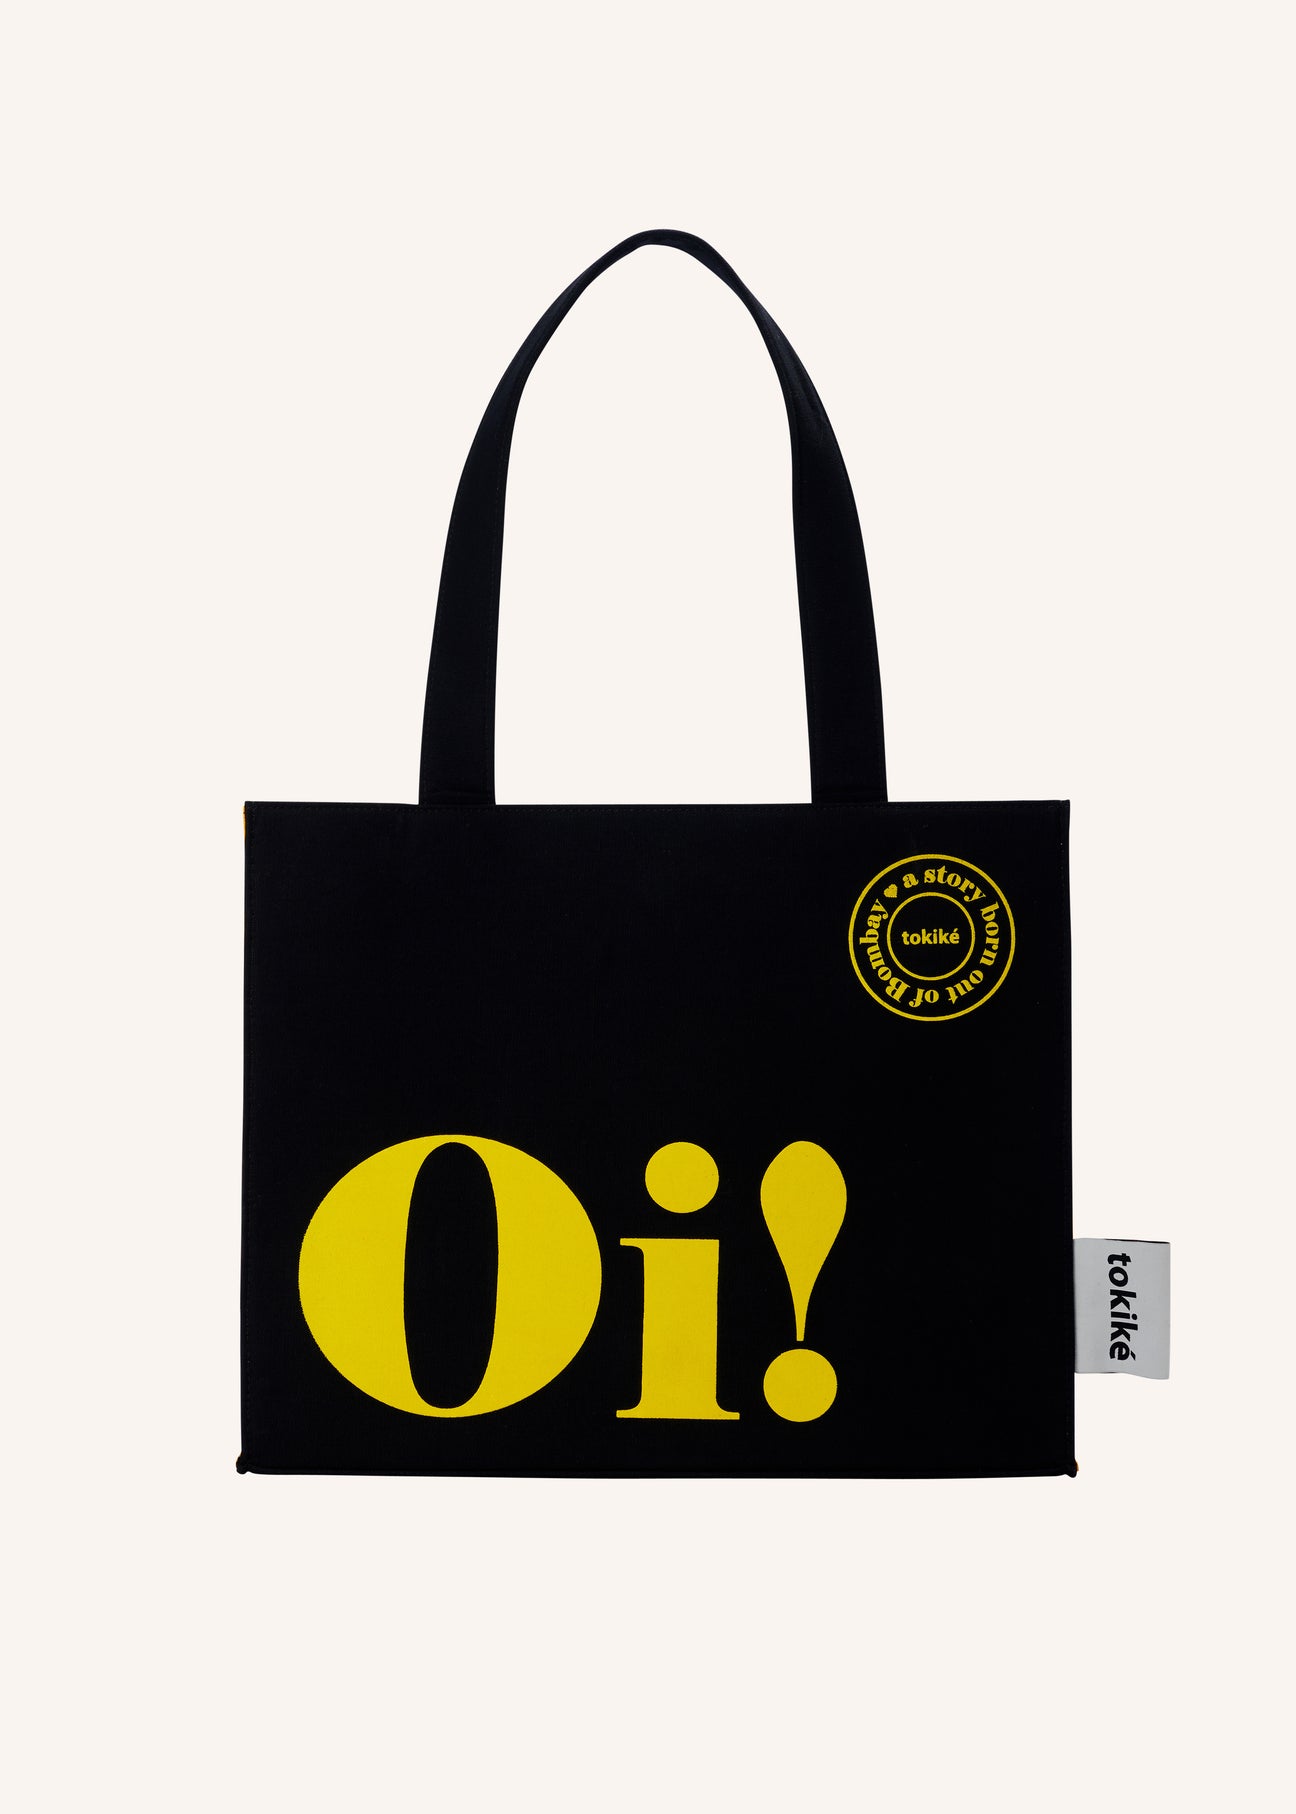 Trendy Tote Shopper Bags Increase Your Style